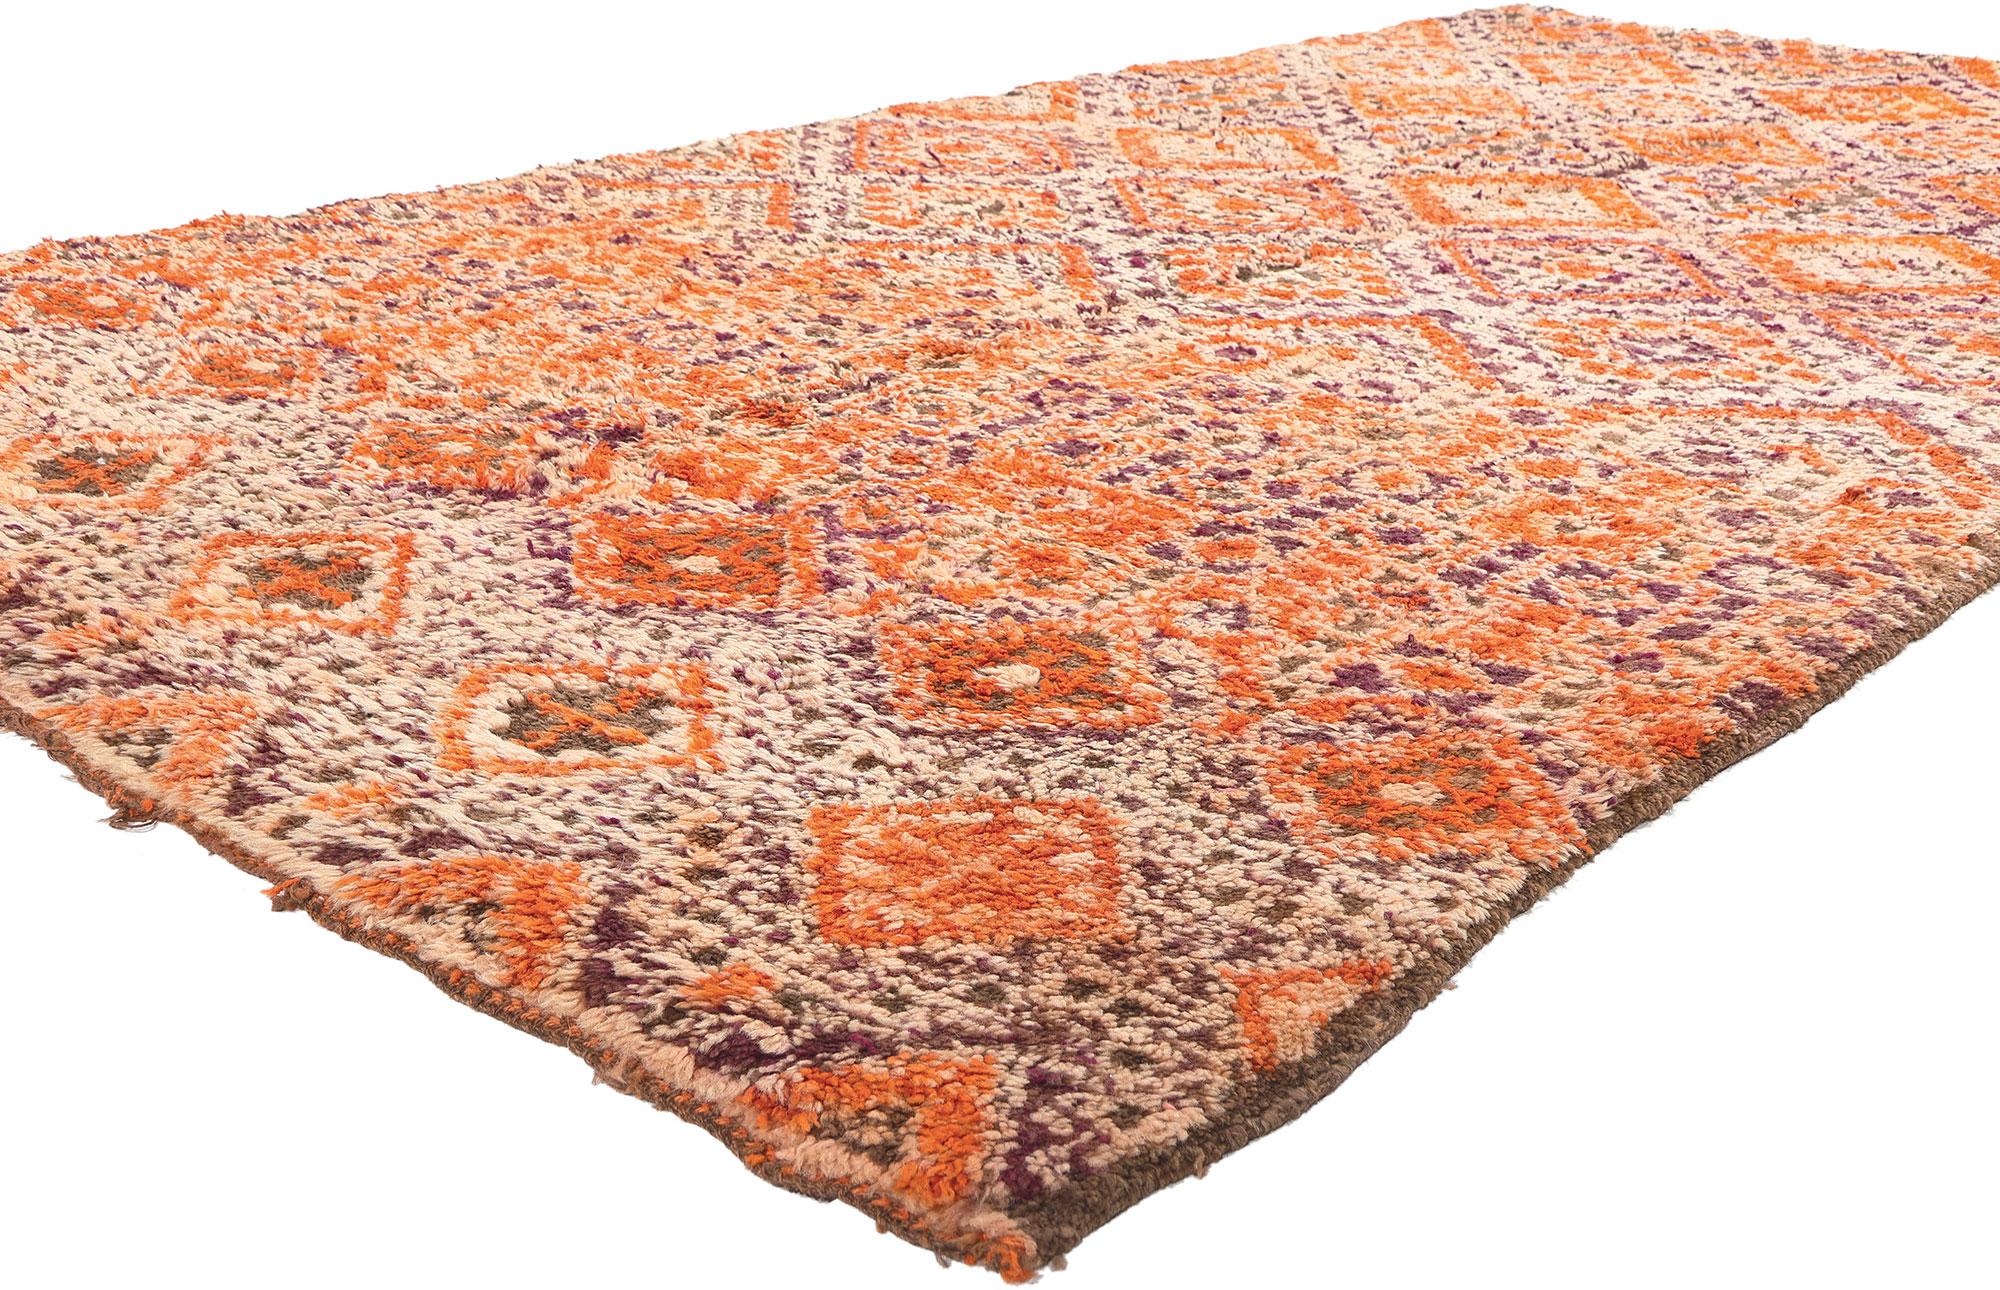 21298 Vintage Beni MGuild Moroccan Rug, 05'07 x 10'10. 
In the magical expanse of the Atlas Mountains in Morocco, the skilled hands of Berber women from the Ait M'Guild tribe weave the enchanting tales of Beni Mguild rugs. These exquisite creations,